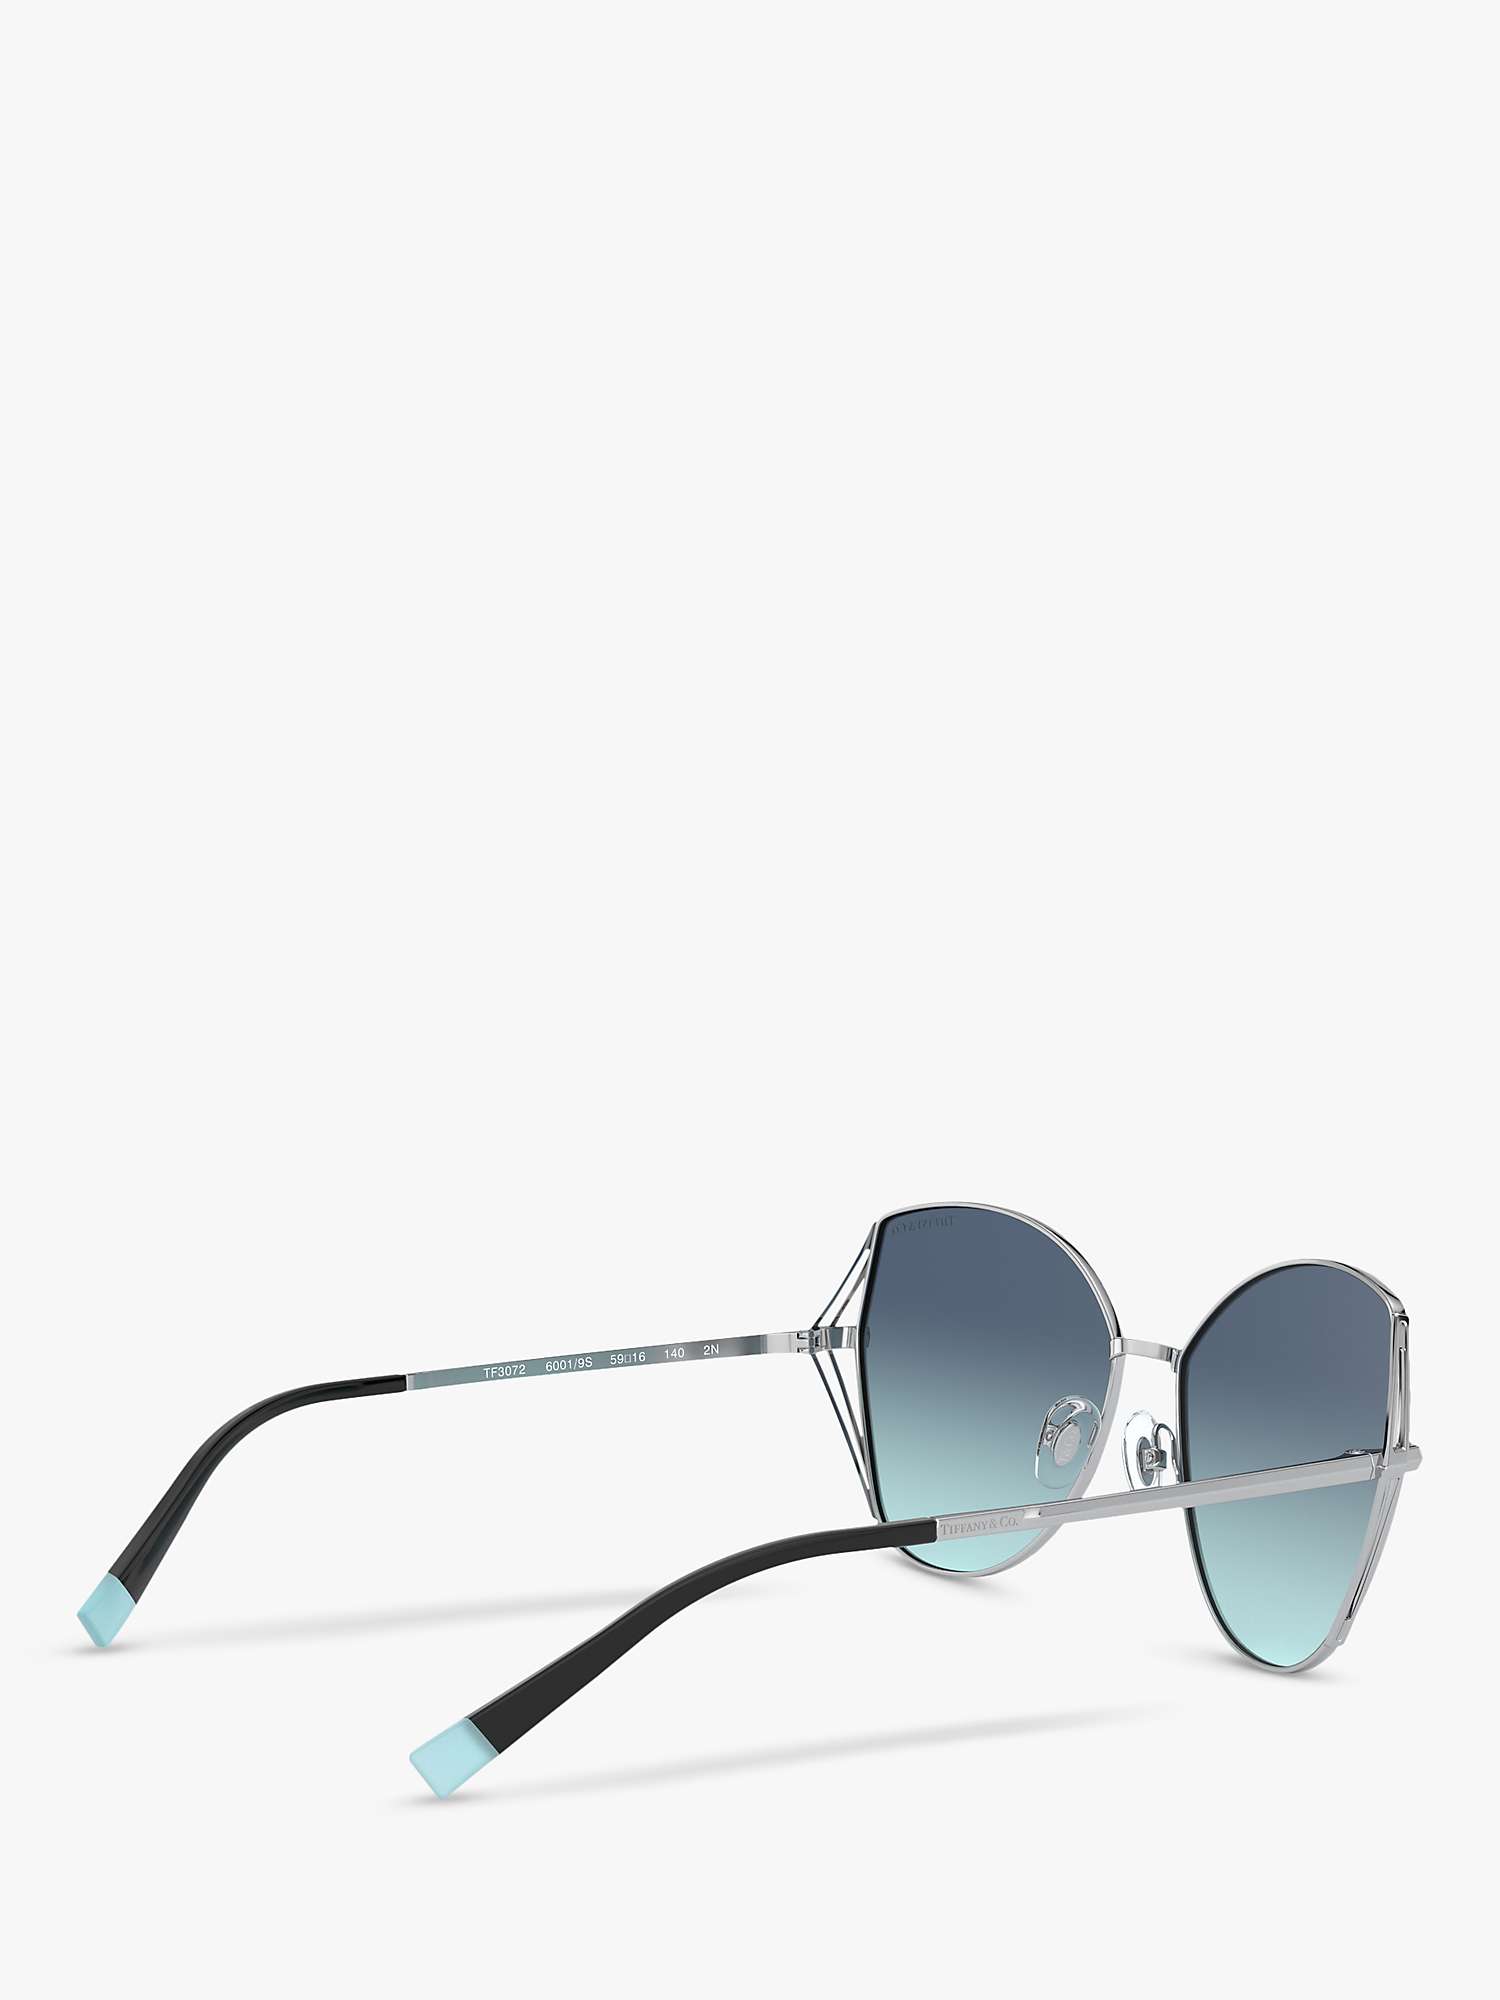 Buy Tiffany & Co TF3072 Women's Butterfly Sunglasses, Silver/Blue Gradient Online at johnlewis.com